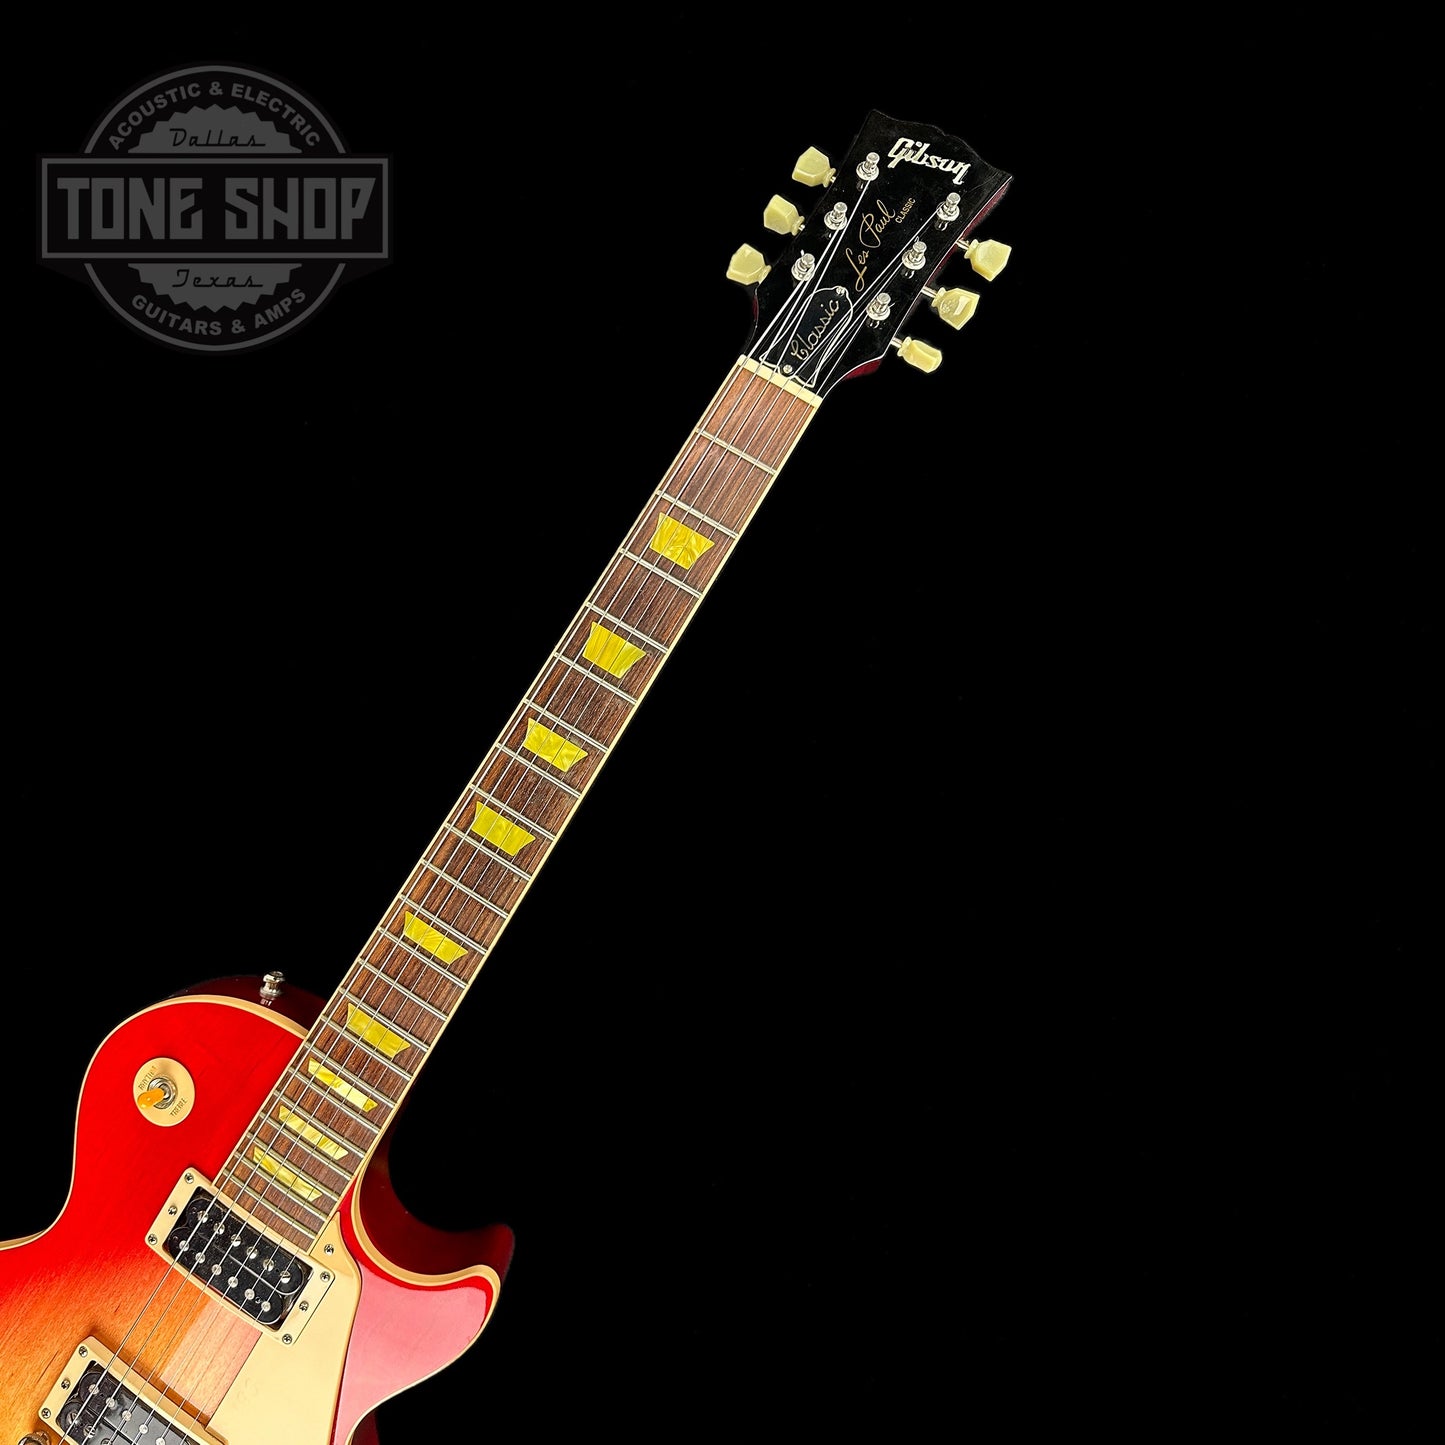 Fretboard of Used Gibson Les Paul Classic Cherry Burst.